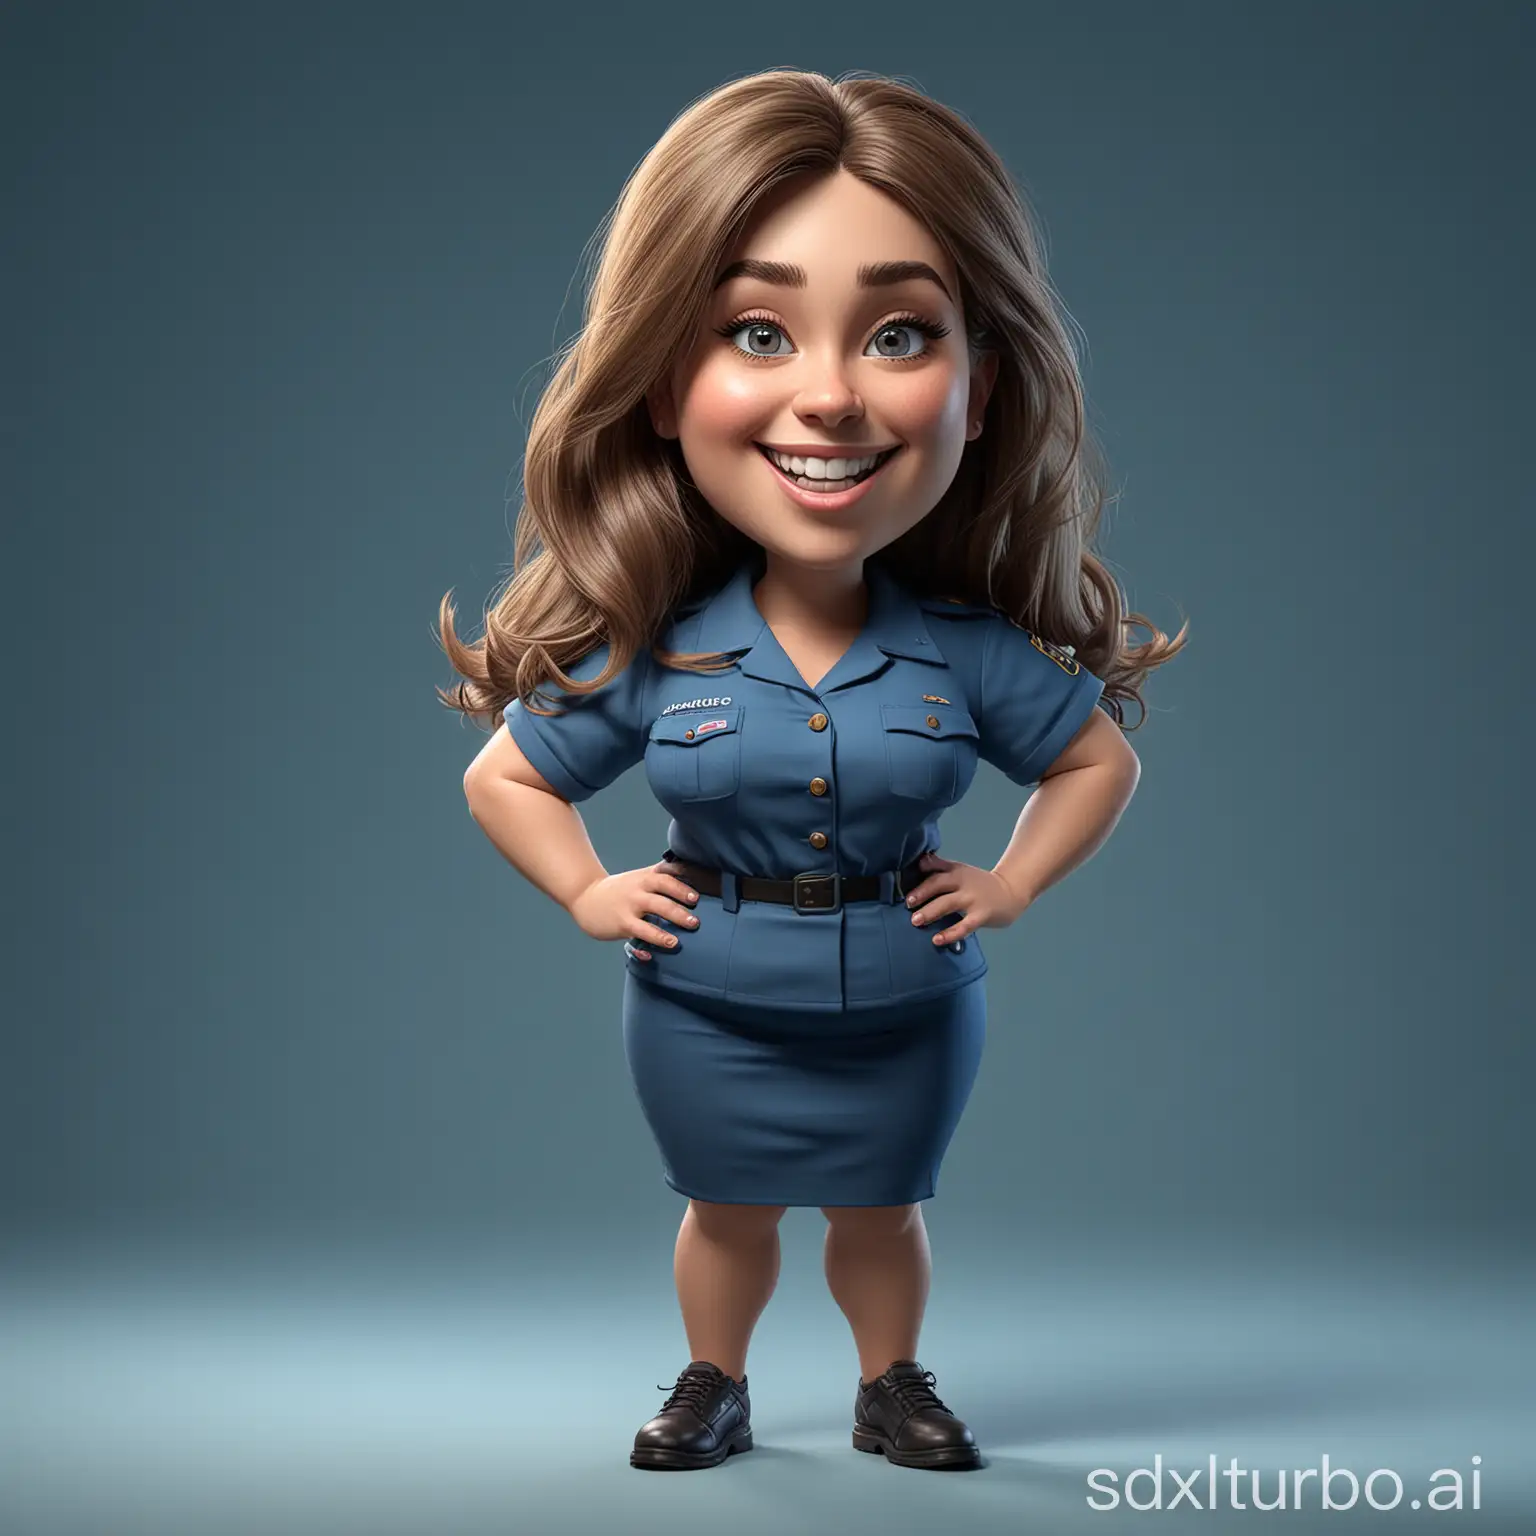 Create a caricature 3D Realistic cartoon style full body with a large head. Fat body, a 23 year old woman. Long shagy hair, oval chubby face, thin eyebrows, slanted eyes, flat nose, smile with your mouth wide open showing your upper and lower teeth. Wearing a blue uniform. Face angle 2/3, facing right. Use soft photography lighting, uhd, hd, 20k. Hyperrealistic, details, color depth, dramatic, side light, blue gradient colorful background.